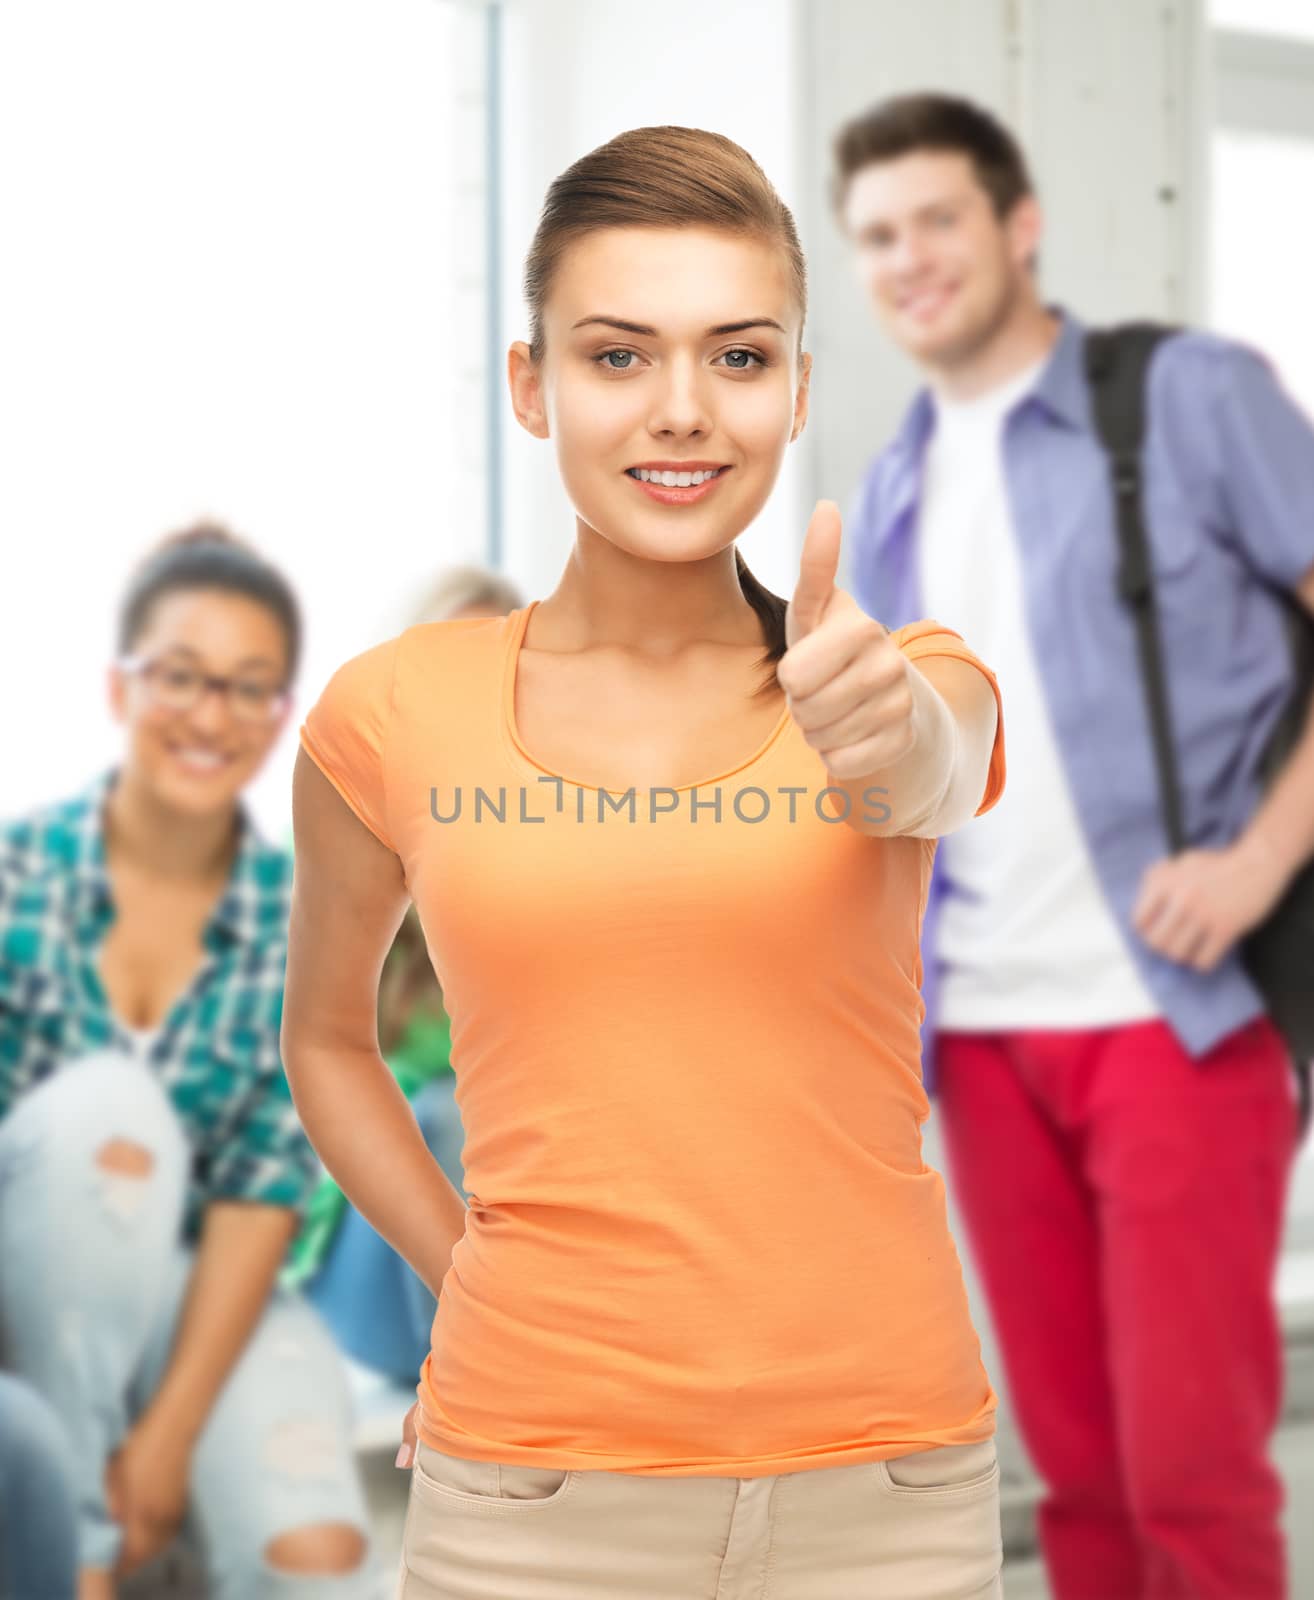 woman showing thumbs up at school by dolgachov